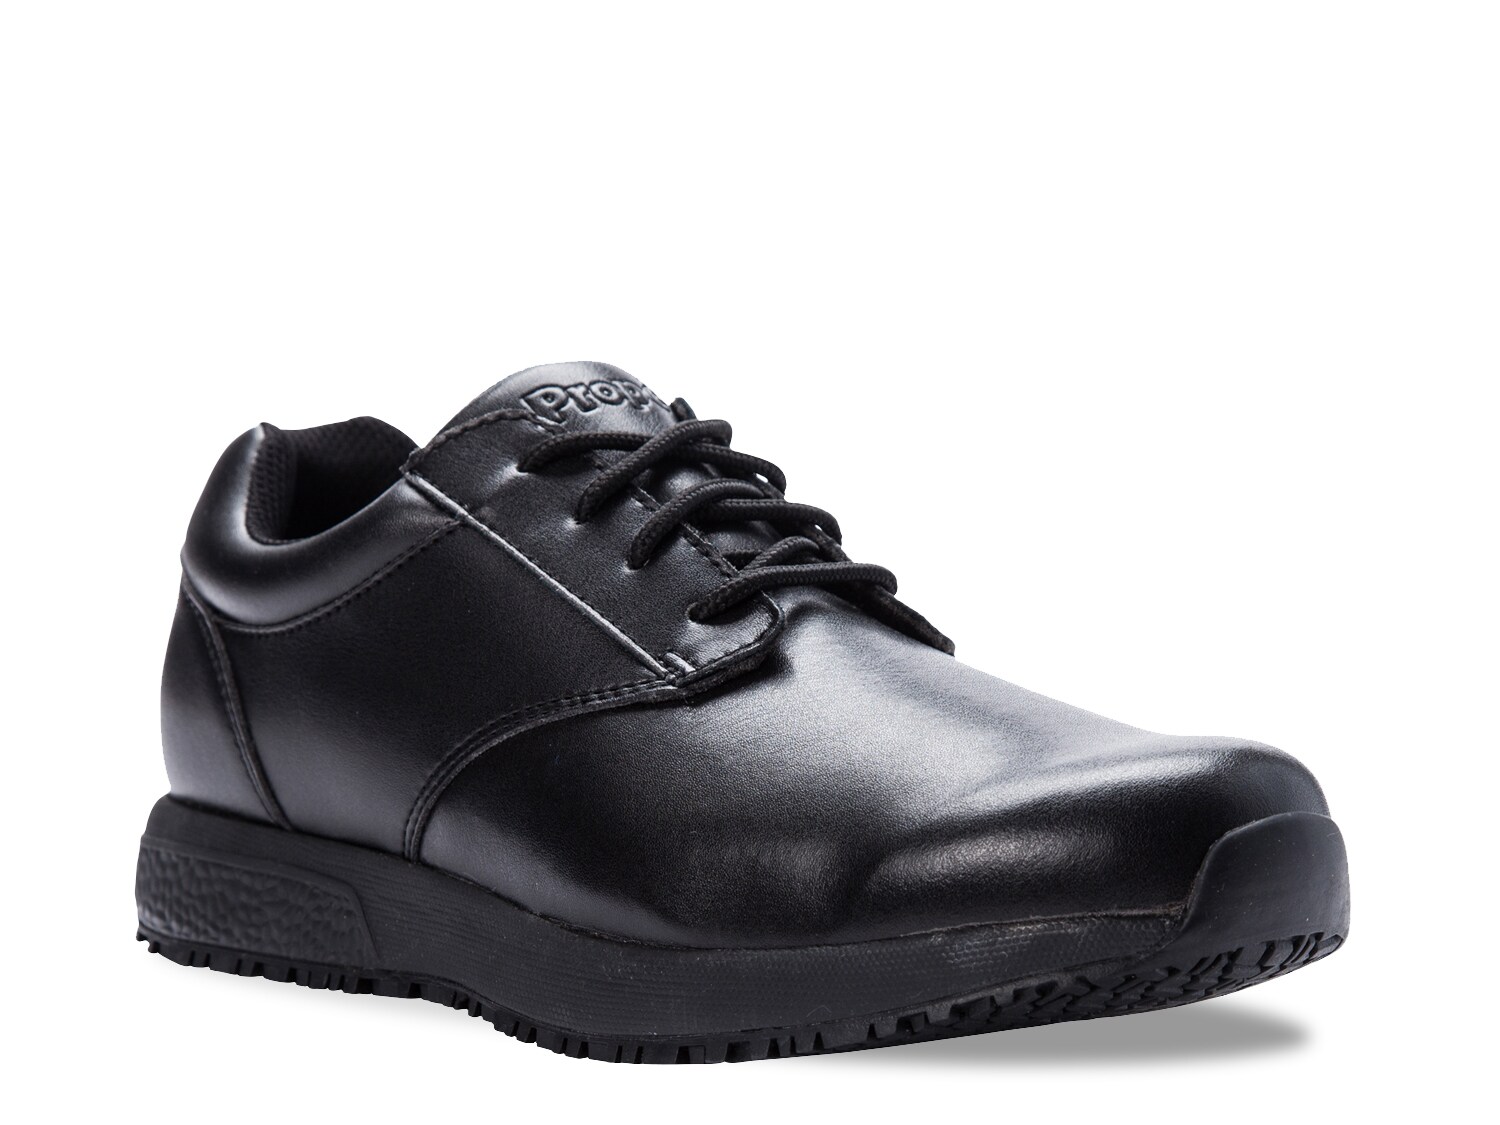 Propet Spencer Work Shoe - Free Shipping | DSW